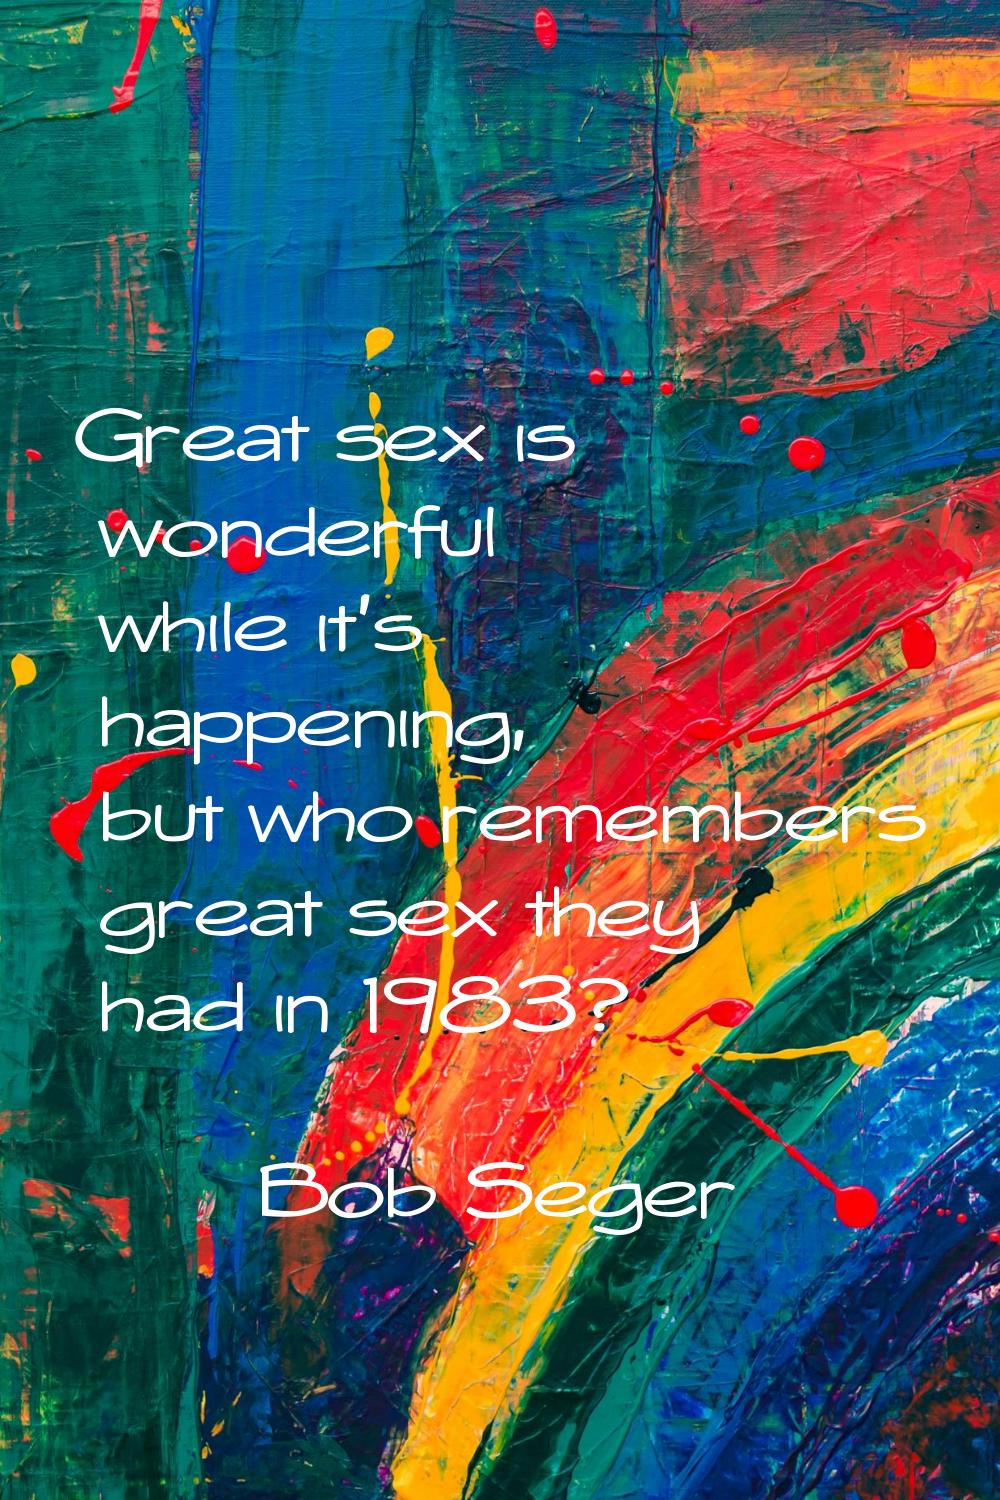 Great sex is wonderful while it's happening, but who remembers great sex they had in 1983?